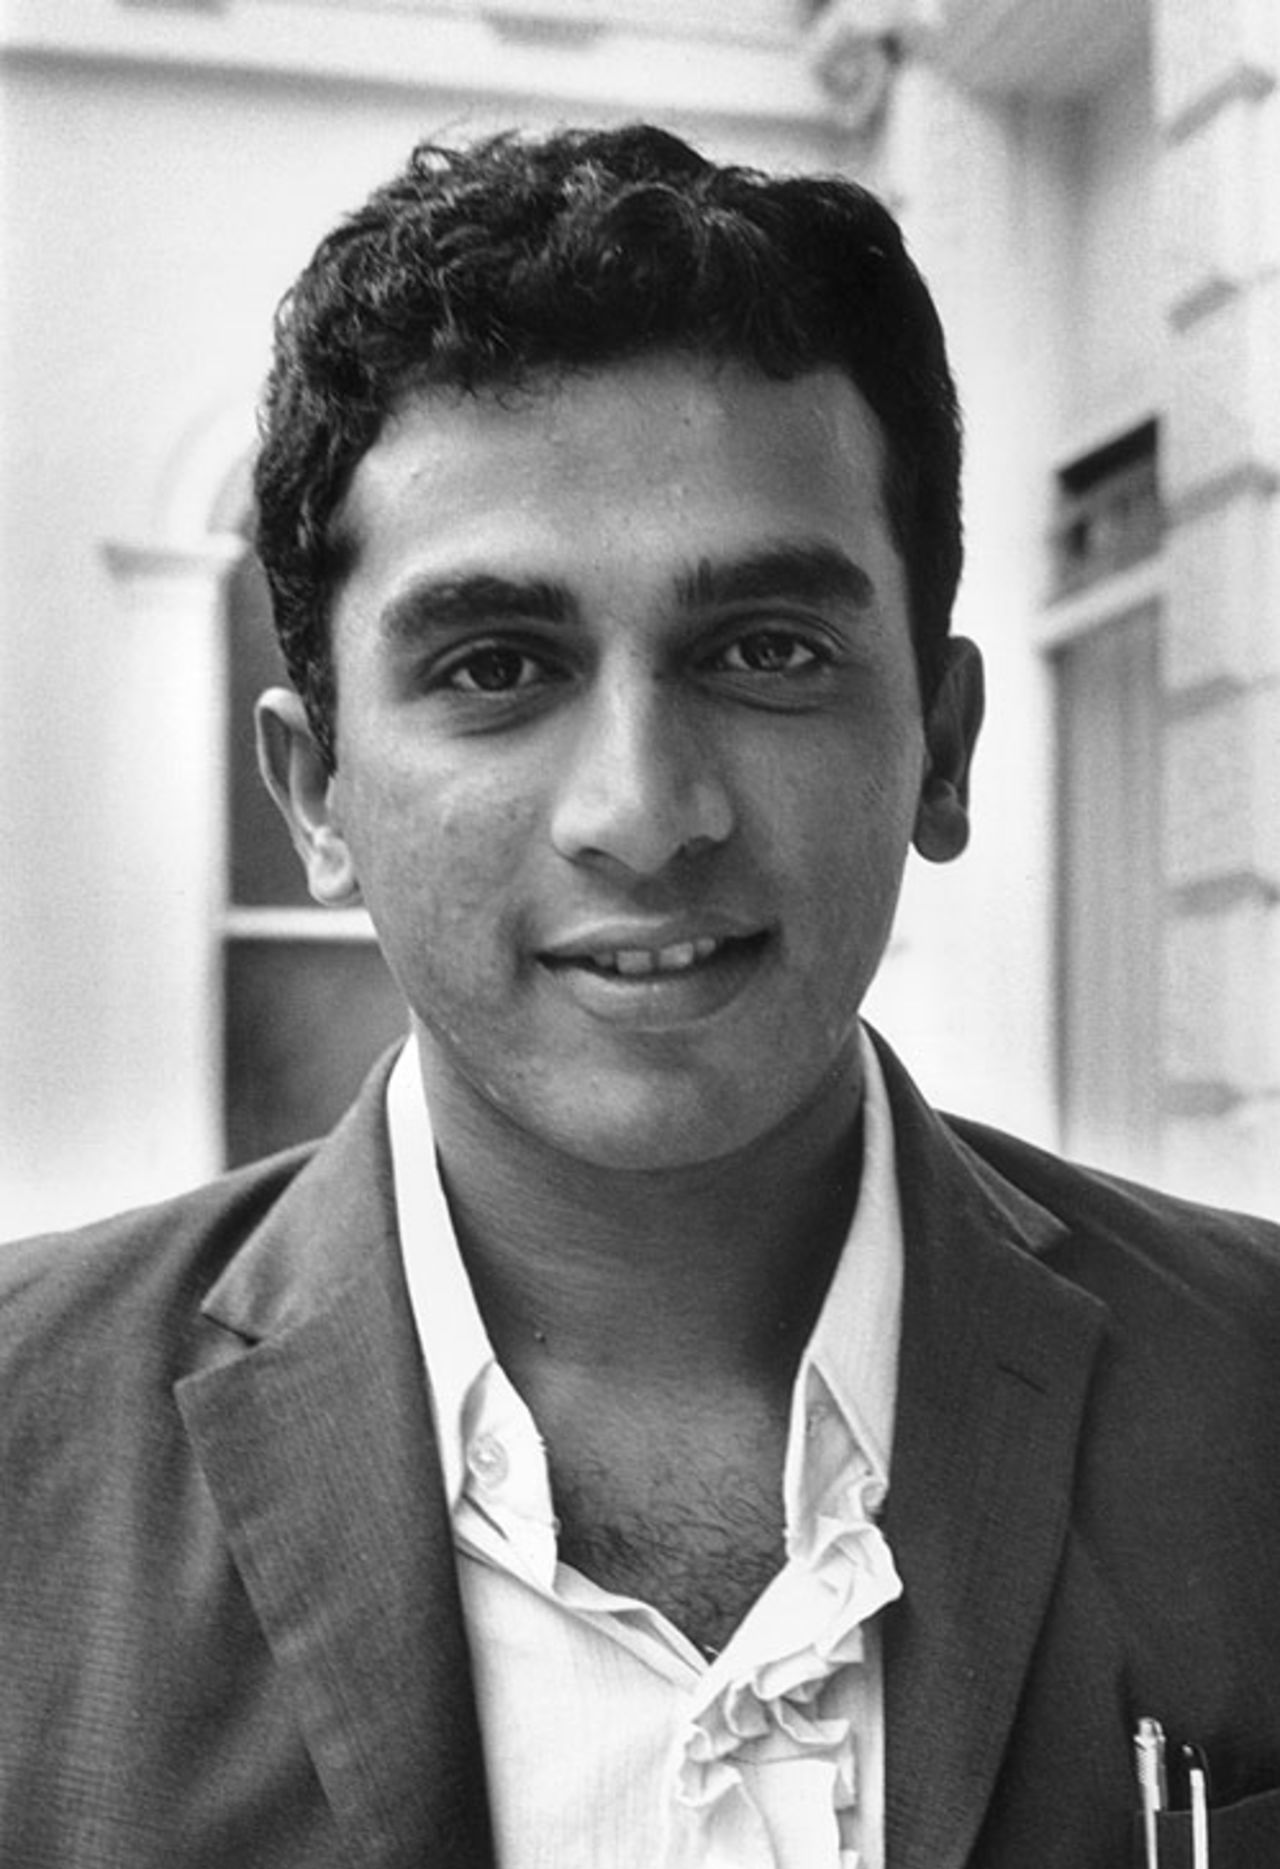 A 21-year-old Sunil Gavaskar on his first tour to England, June 21, 1971